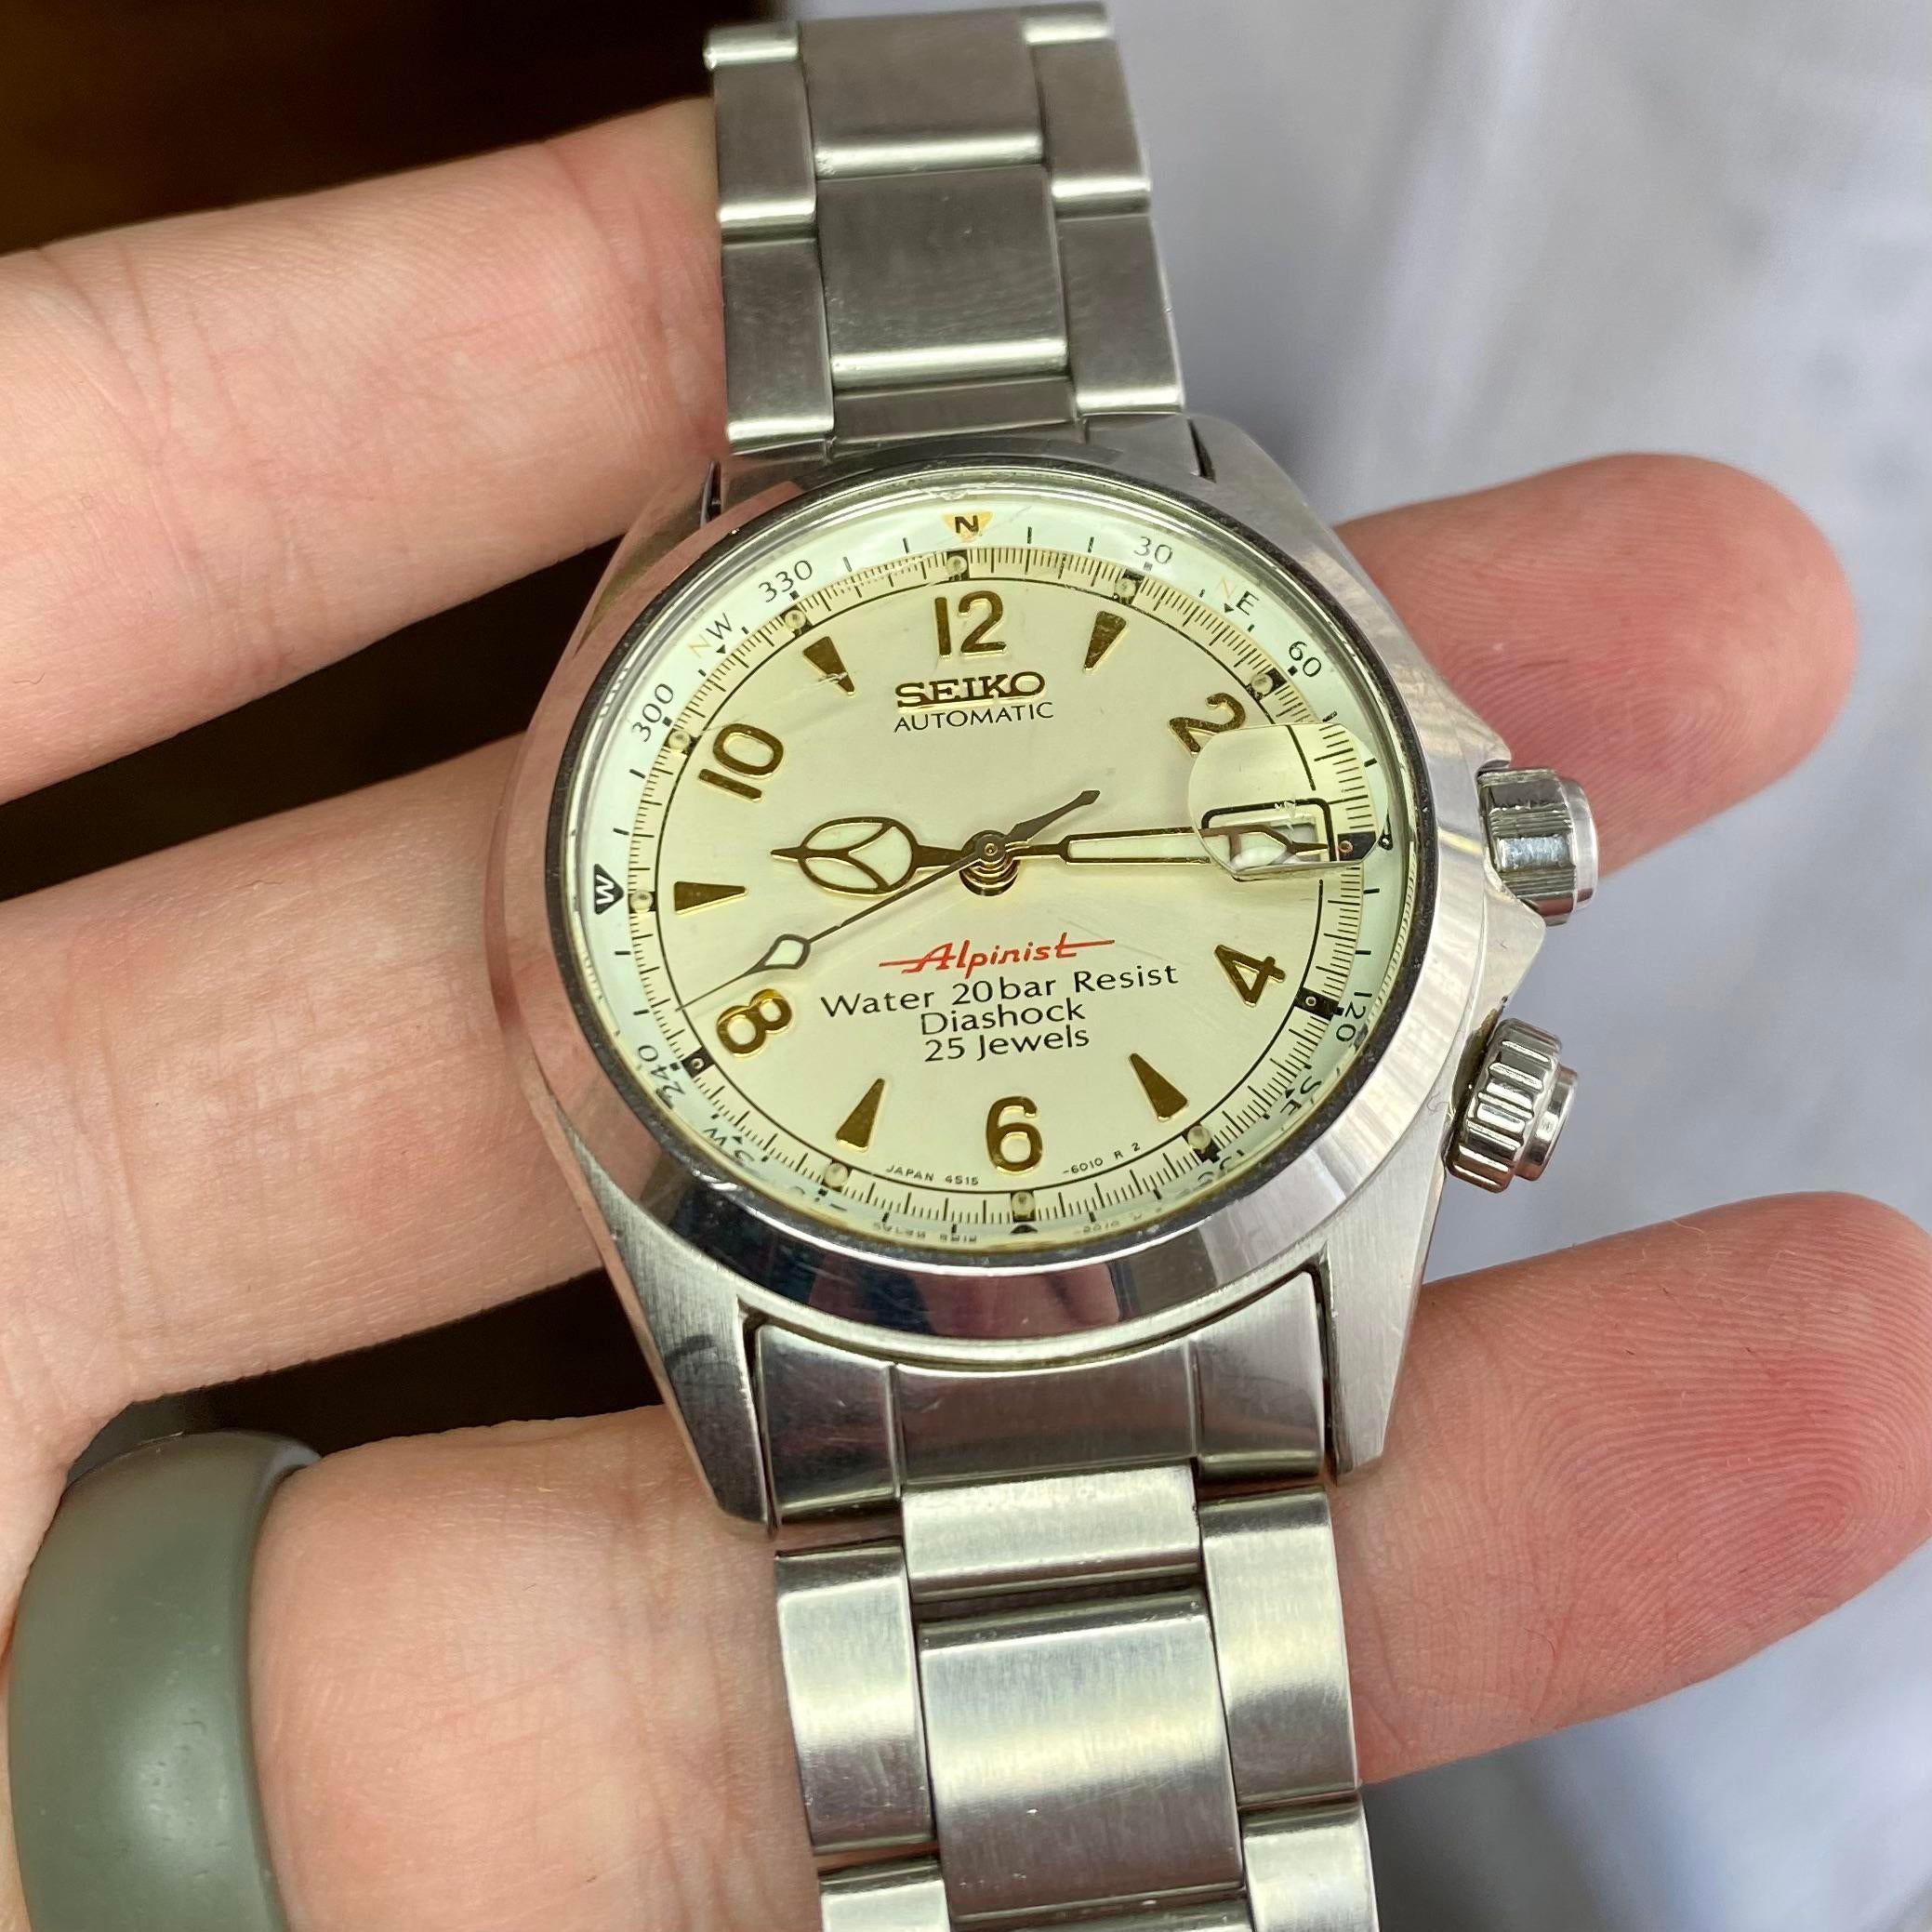 WTS] [REDUCED] Seiko SCVF007 4s15 “Red Alpinist” - $549 - READ DESCRIPTION  | WatchCharts